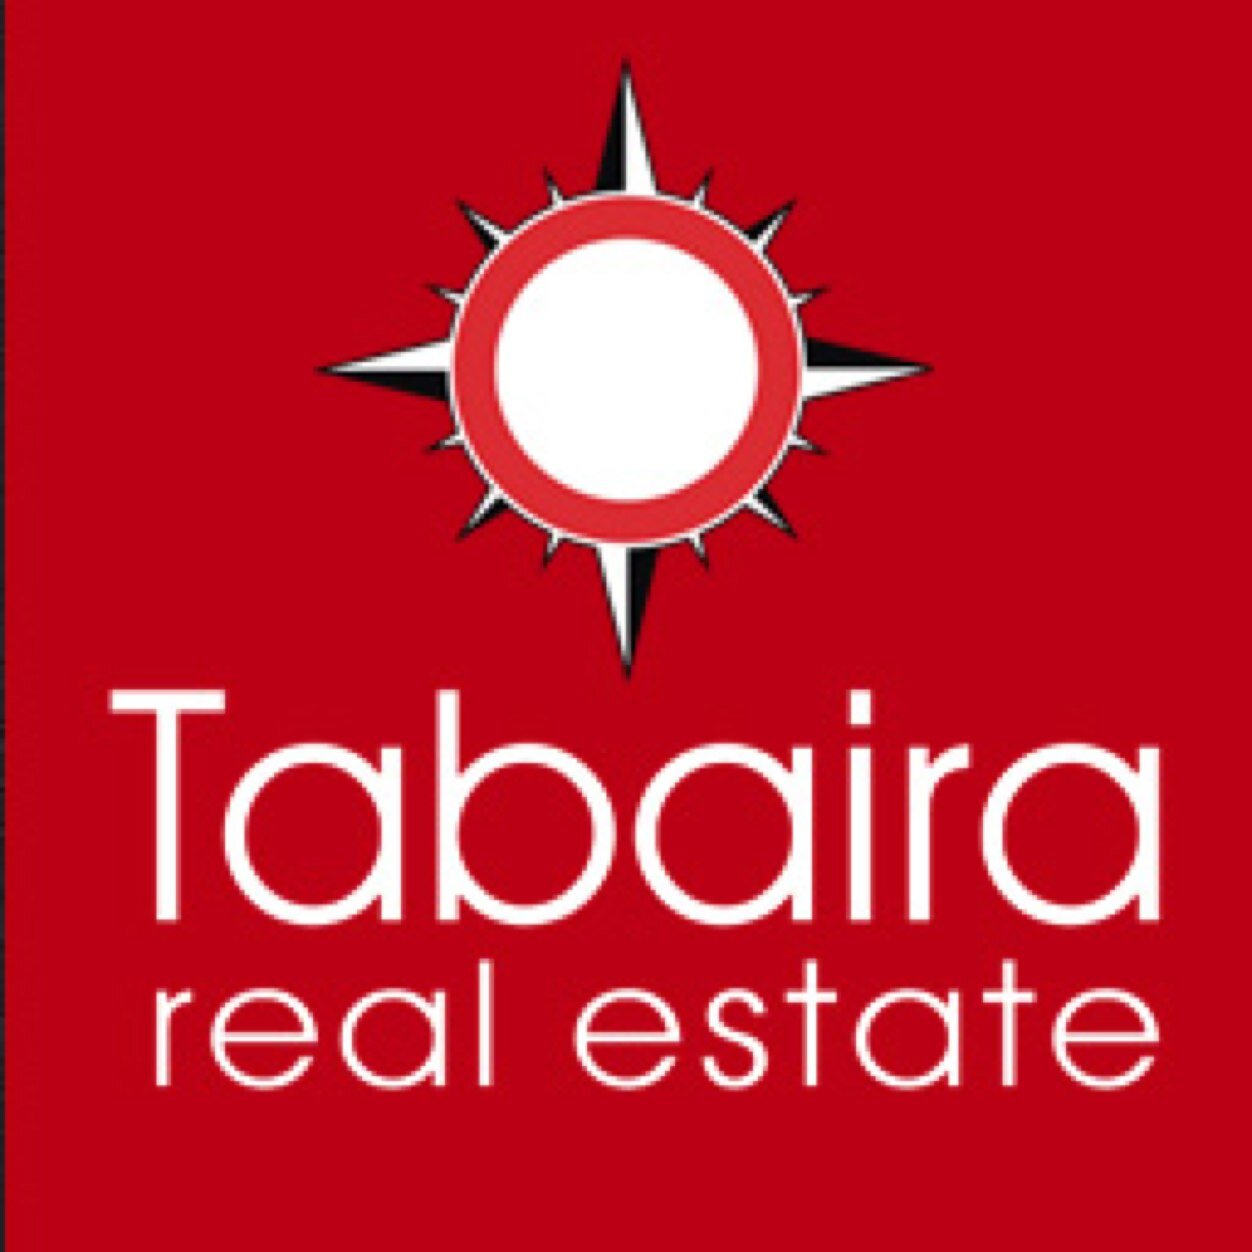 Tabaira Real Estate, we are estate agents in Moraira, Spain. We are specialised in finding properties in Moraira, Benissa, Benitchell and surrounding areas.